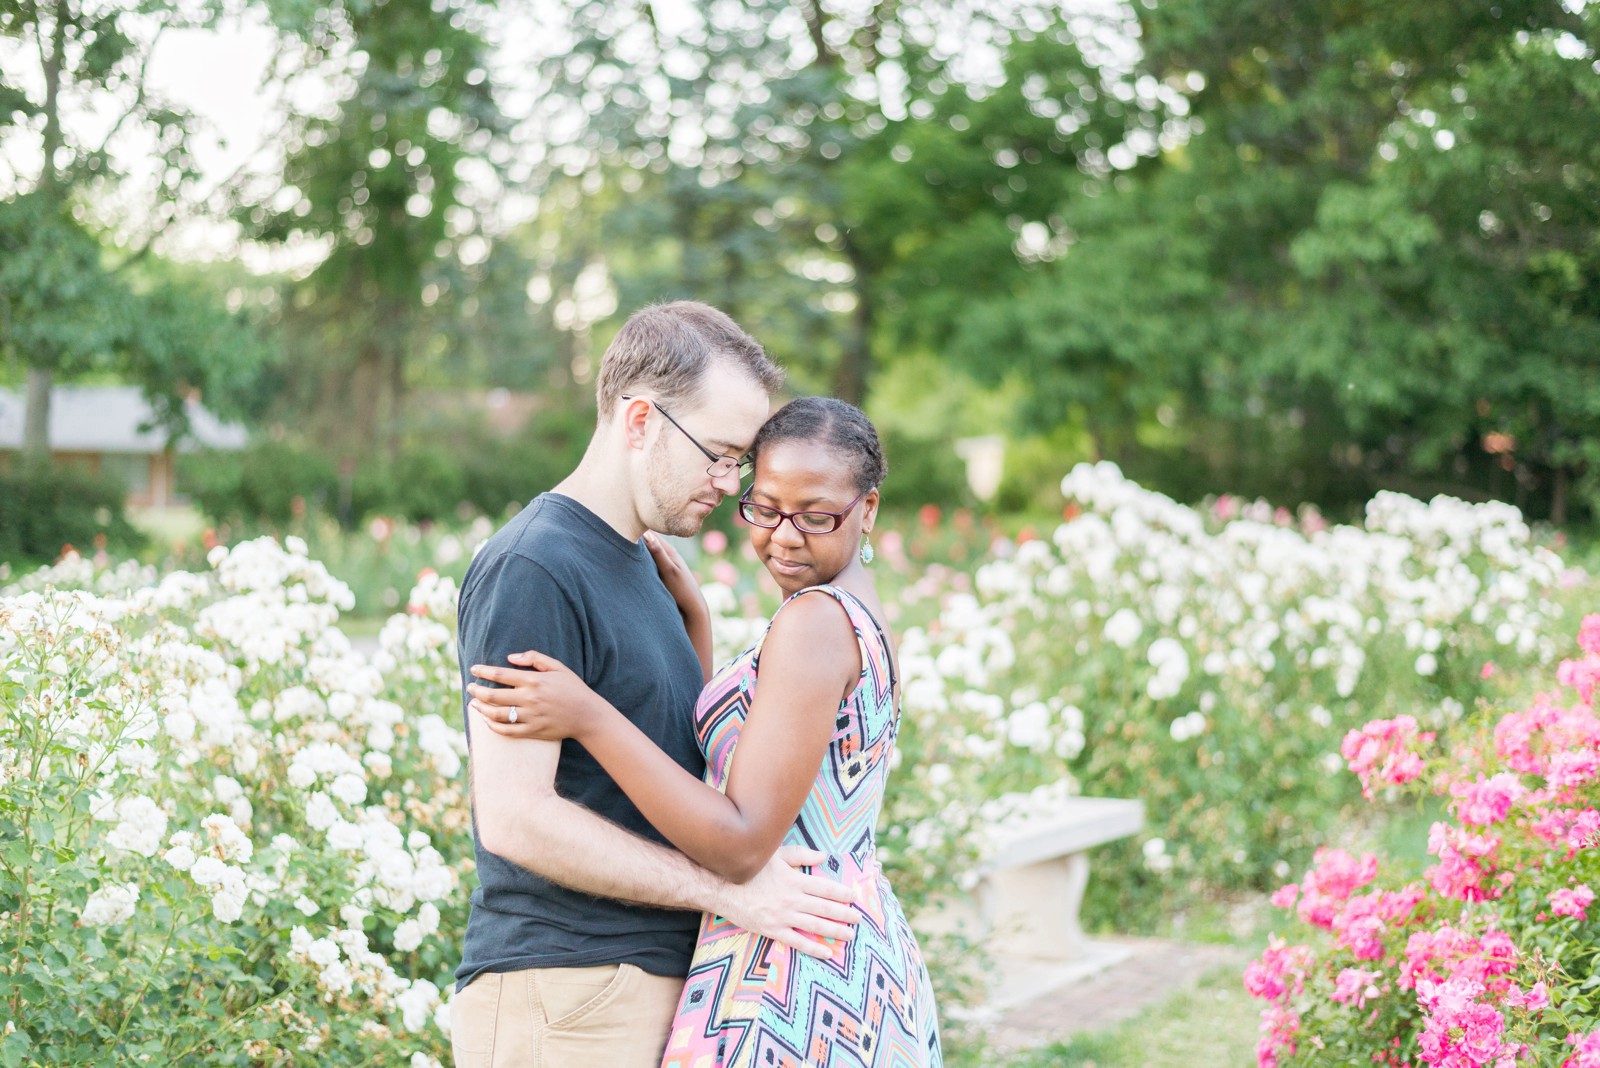 columbus-ohio-engagement-session-at-whetstone-park-of-roses-in-the-summer-time-with-roses_0071